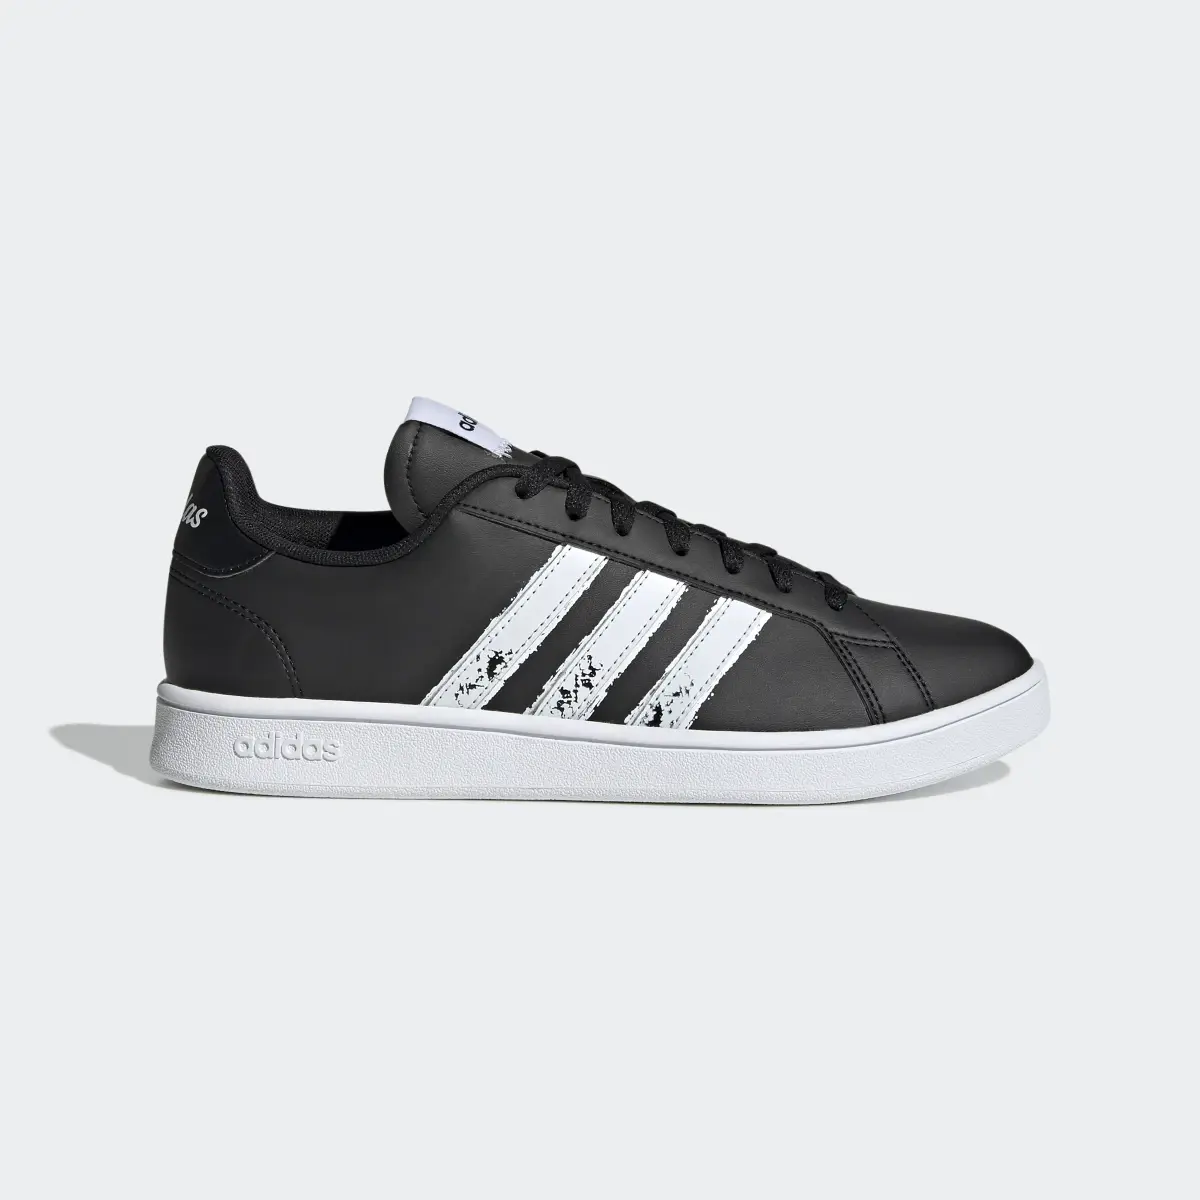 Adidas Grand Court Base Beyond Shoes. 2